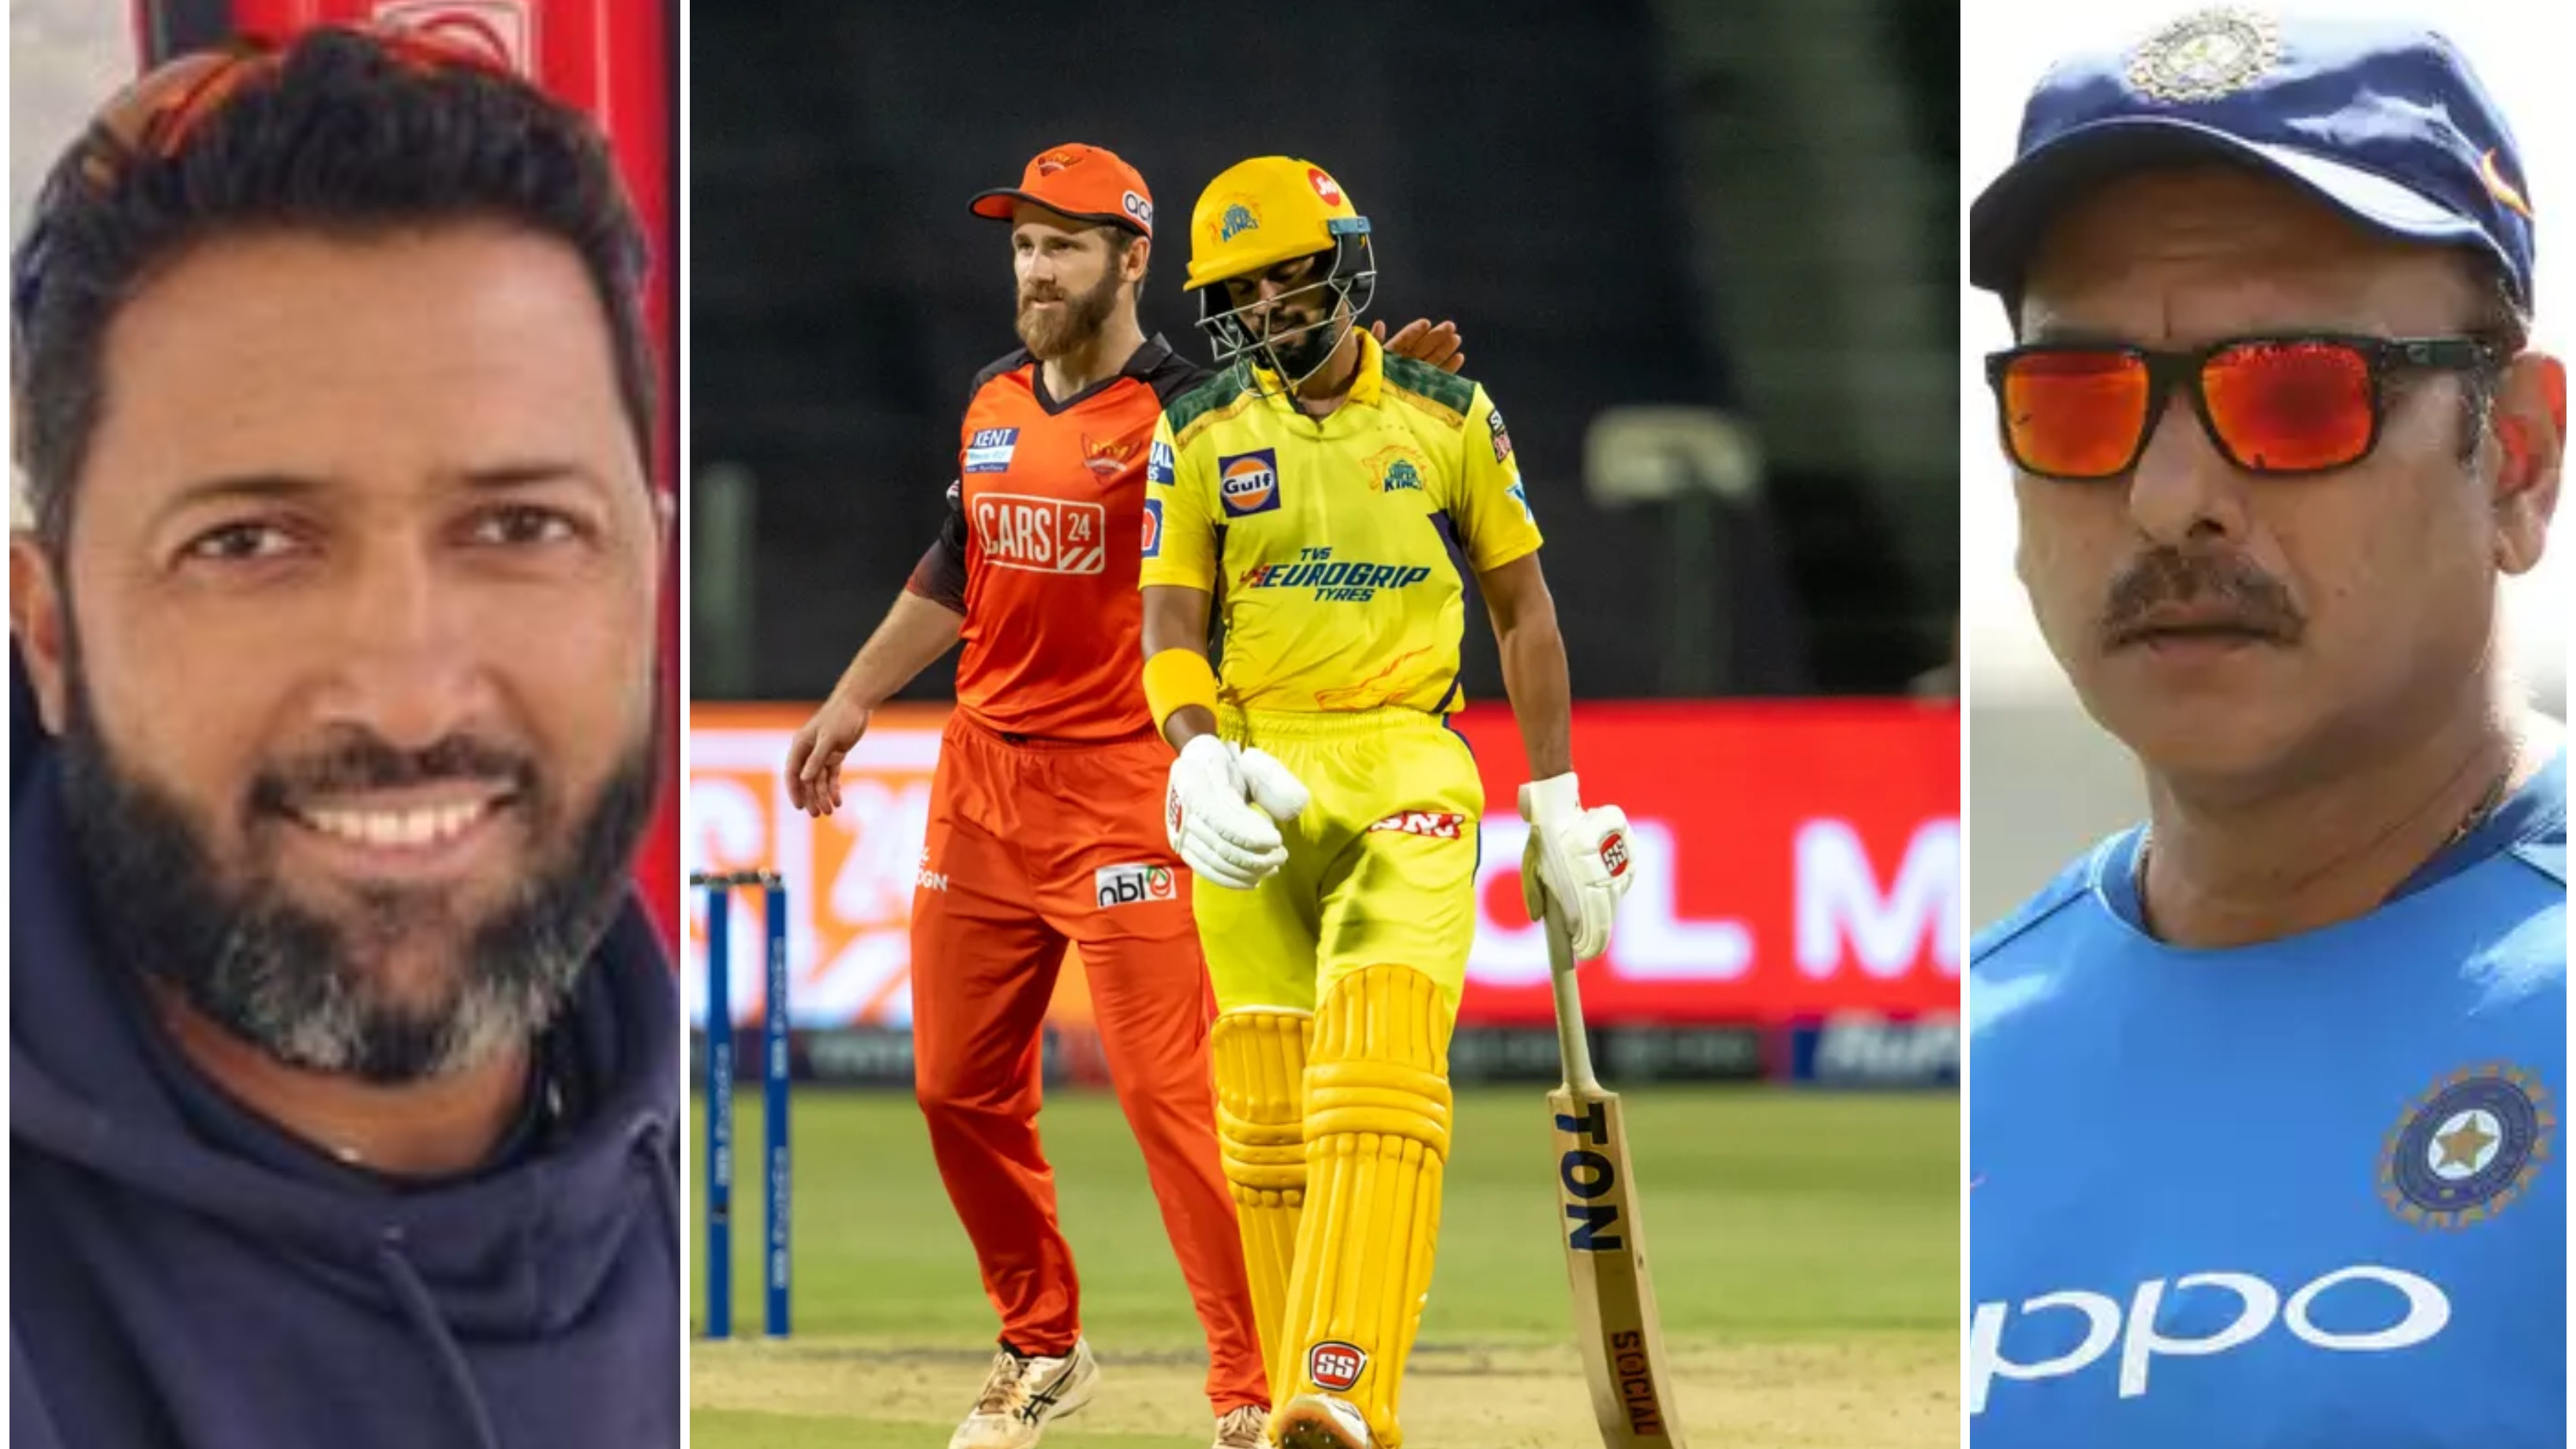 IPL 2022: Cricket fraternity reacts as Ruturaj Gaikwad’s classy 99 propels CSK to 202/2 against SRH